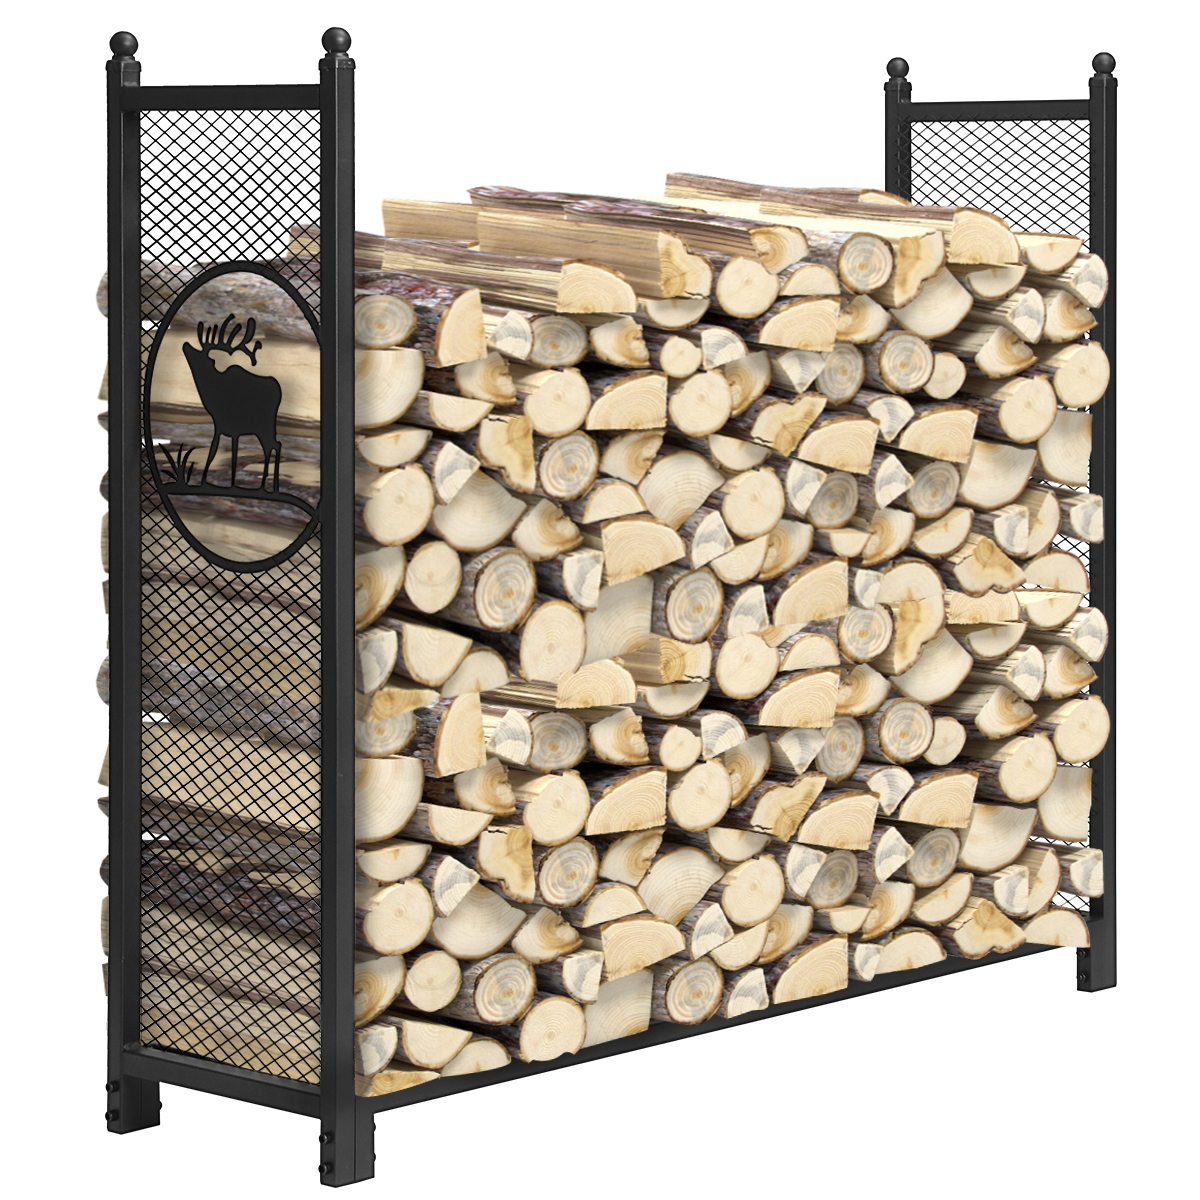 KINGSO 8ft Firewood Rack Outdoor Heavy Duty Fire Wood Rack Firewood Holder Storage Rack Easy Assemble Steel Tubular Log Rack for Patio Deck Storage Stand for Fireplace Accessories 